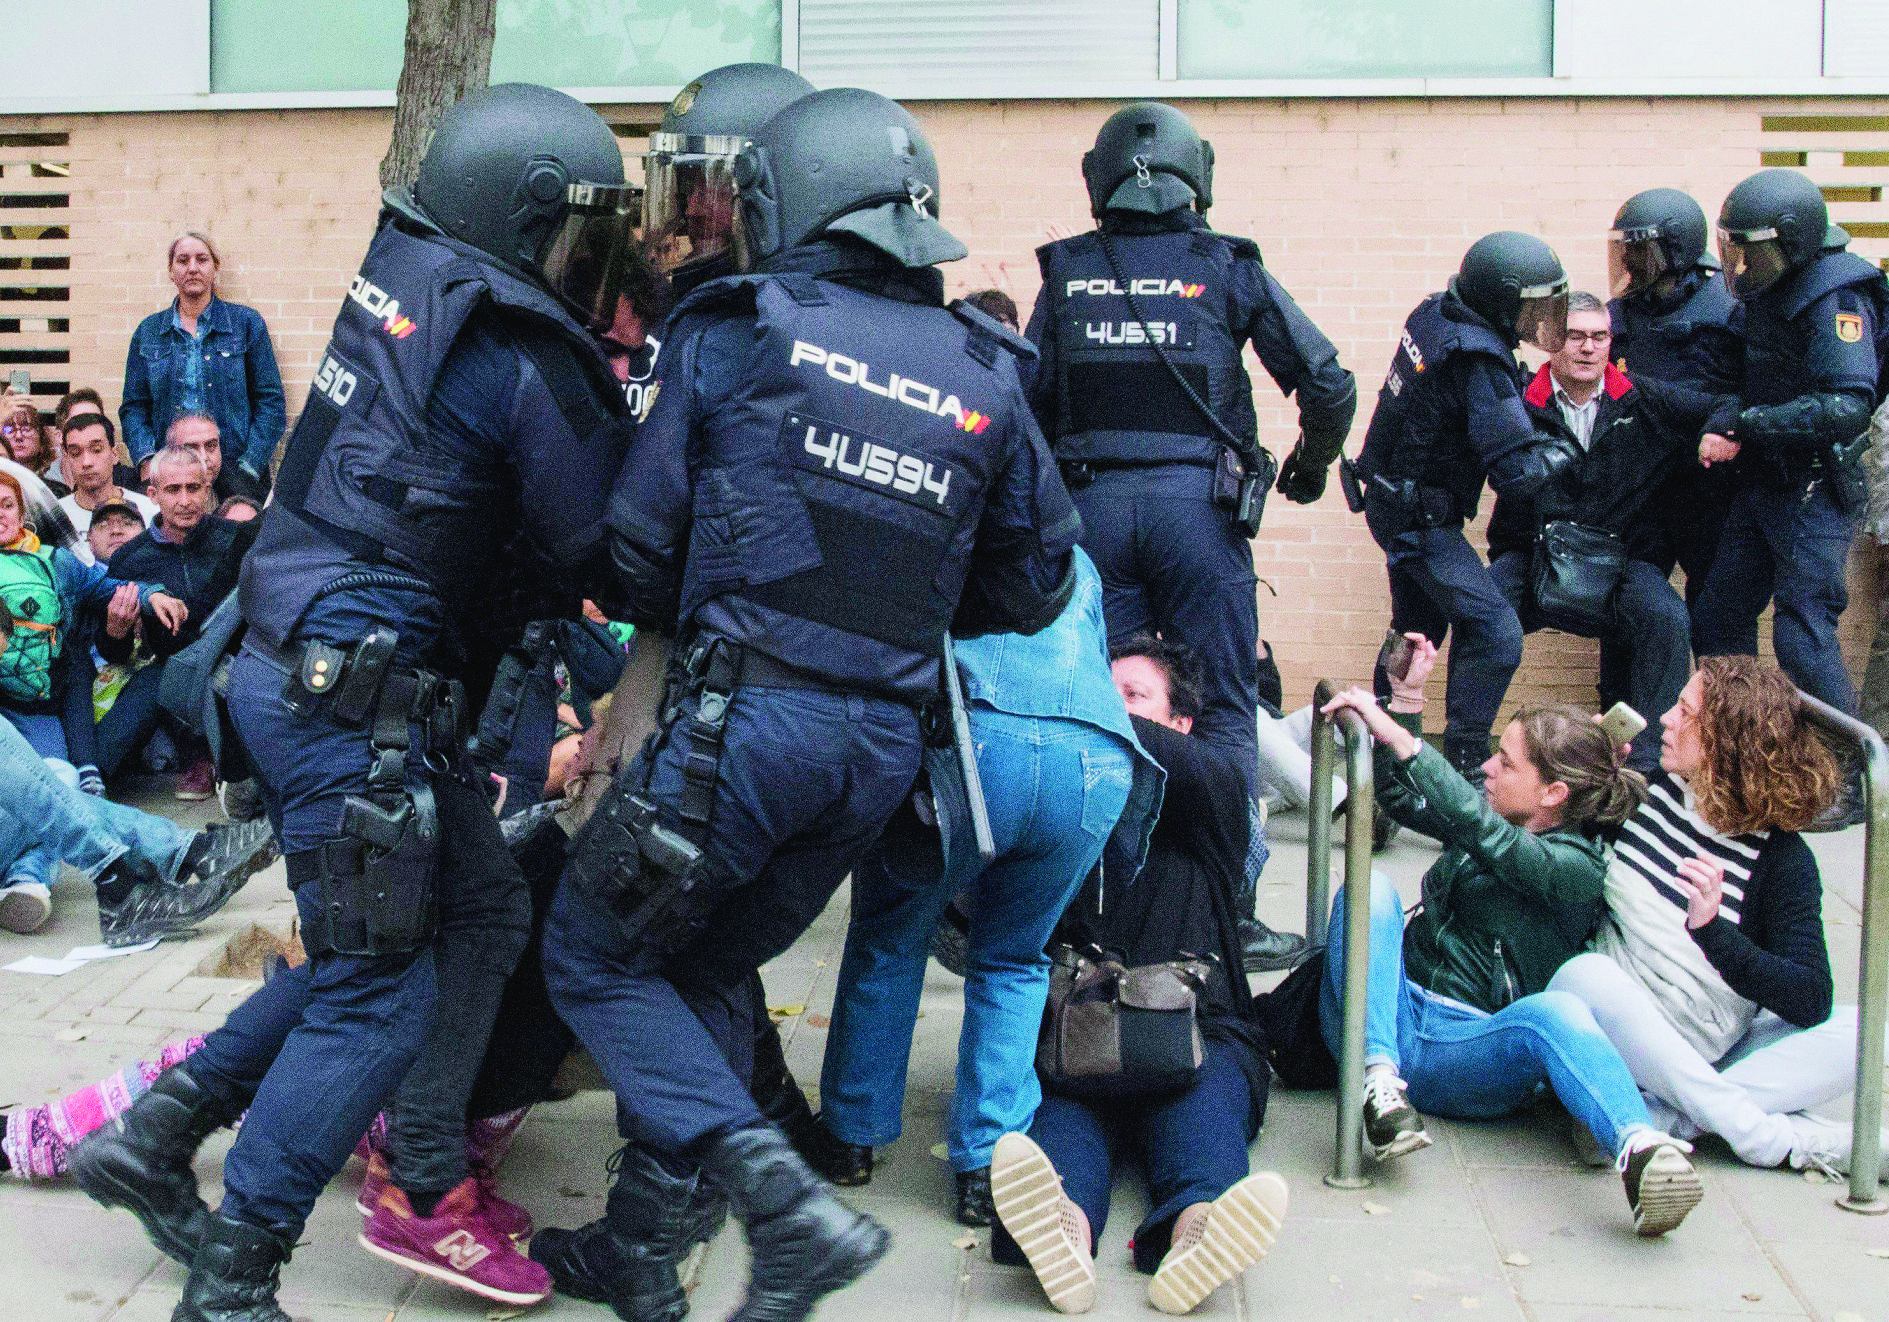 epa06237424 Catalan people clash with police outside at a polling center set at a health clinic clash with Spanish National Police officers after police forces seized ballot boxes during the '1-O Referendum' in Cappont, Lleida, Catalonia, northeastern Spain, on 01 October 2017. National Police officers and Civil guards have been deployed to seize voting material and to prevent the people from entering to the polling centers and vote in the Catalan independence referendum, that has been banned by the Spanish Constitutional Court, what has provocked clashes between pro-independence people and the police forces in some polling centers.  EPA/Adria Ropero SPAIN CATALONIA REFERENDUM